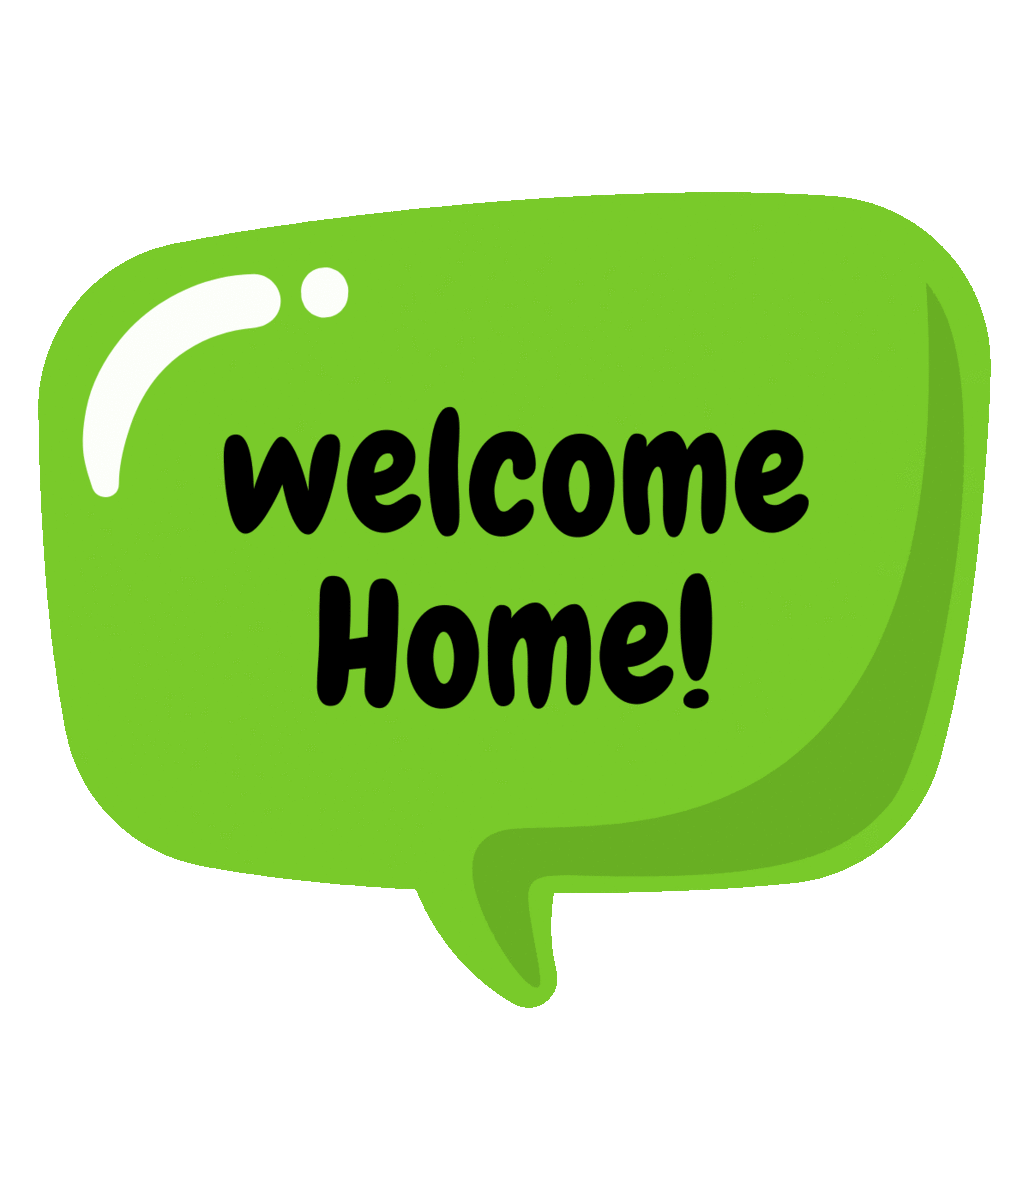 Welcome Home Text Sticker by Jackson Stanley REALTORS for iOS & Android ...